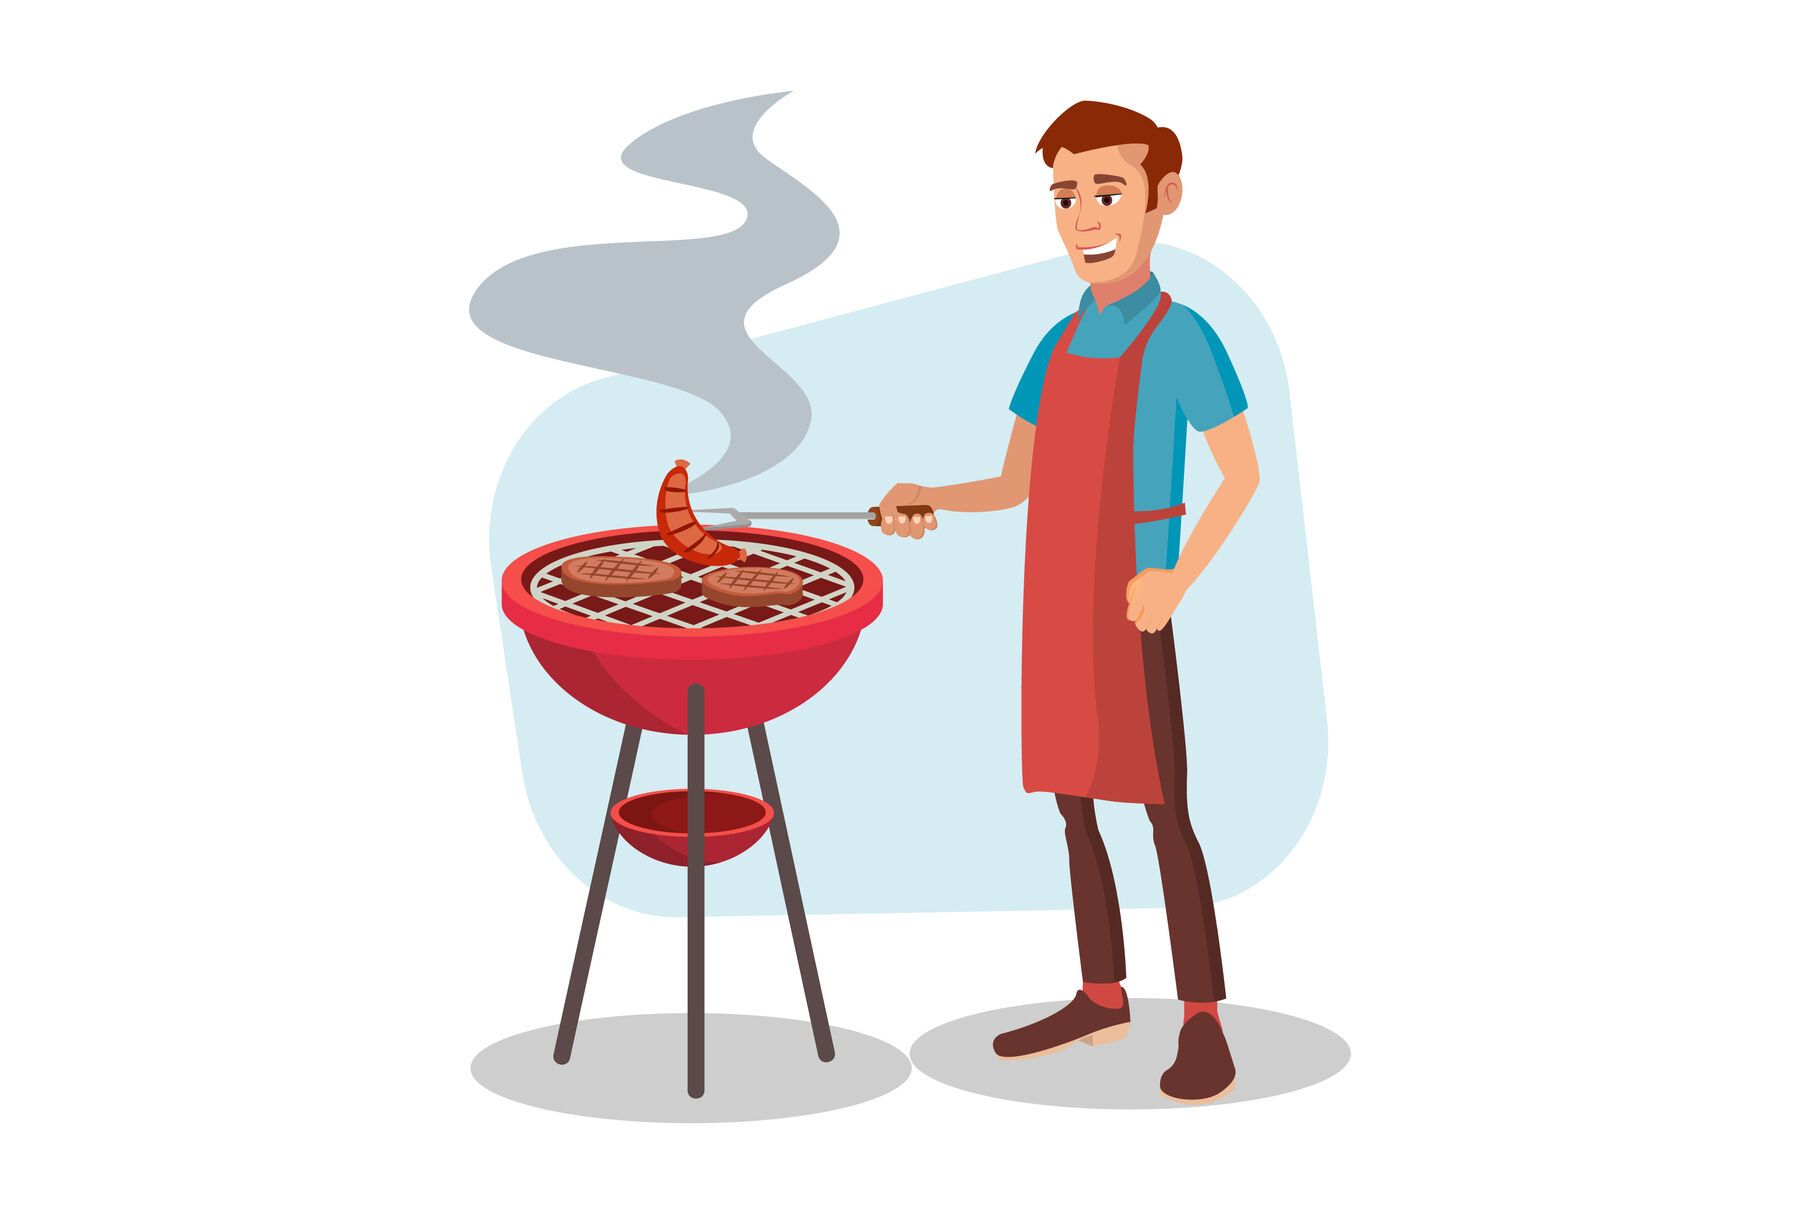 Bbq Cooking Vector Man Cook Grill Meat On Bbq Isolated Flat Cartoon